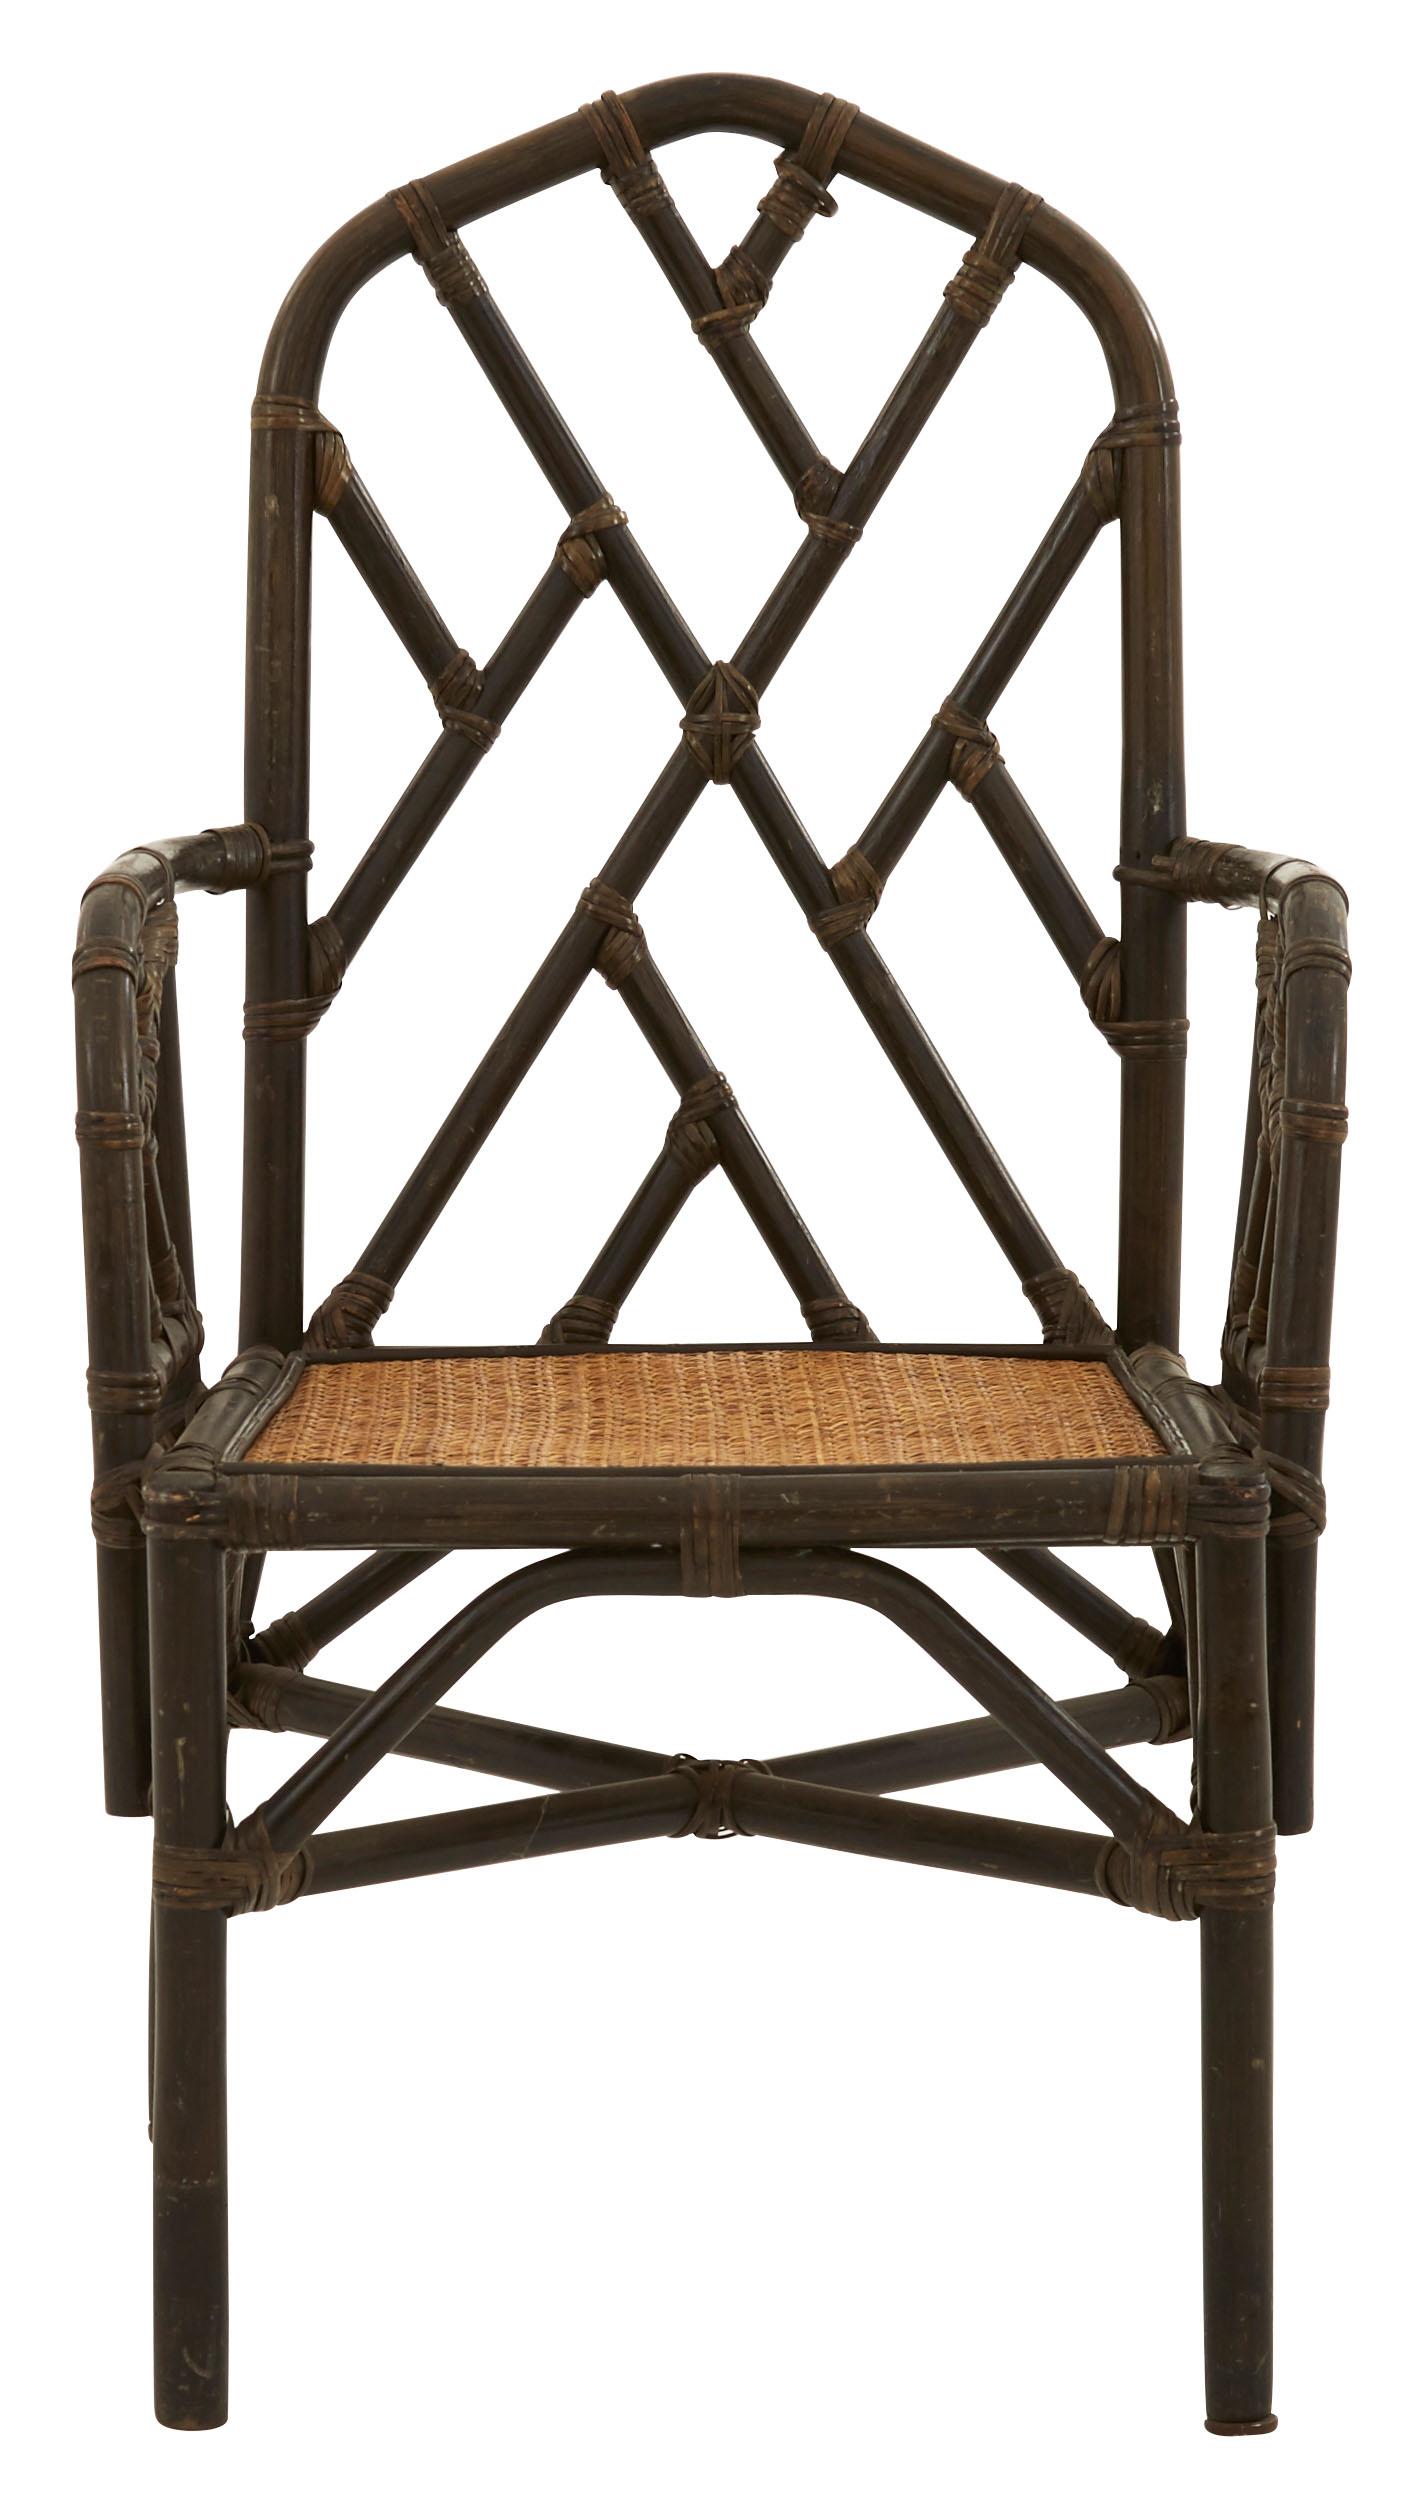 • Bamboo frame
• Patinaed finish
• Original cane seat
• Mid-20th century
• American

Dimensions
• Overall 22.5